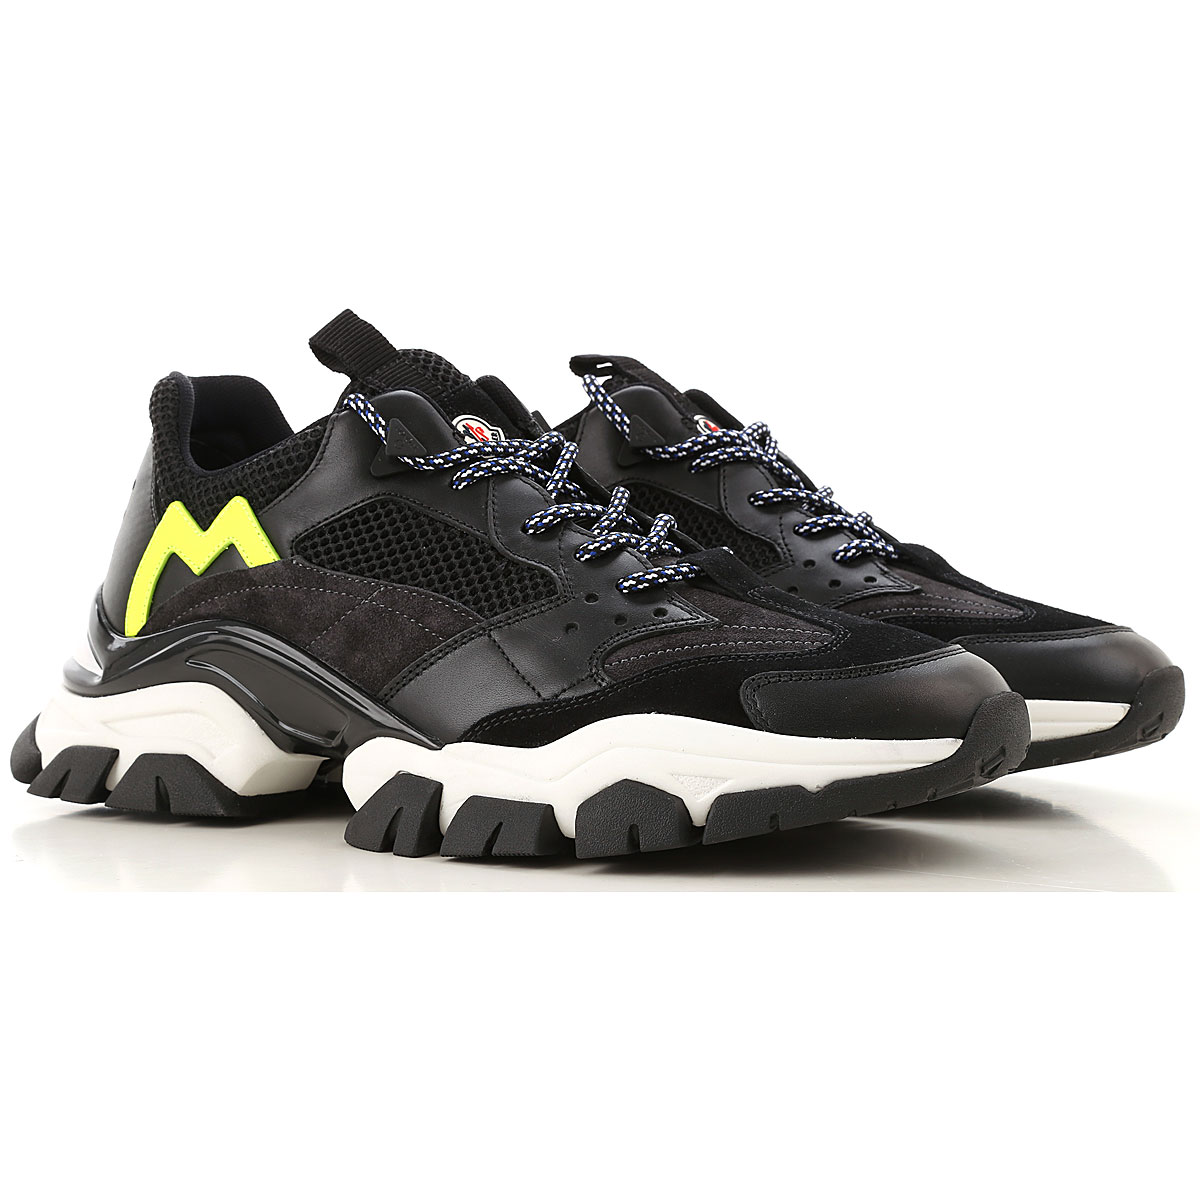 Mens Shoes Moncler, Style code: 103890002soy-999-terence